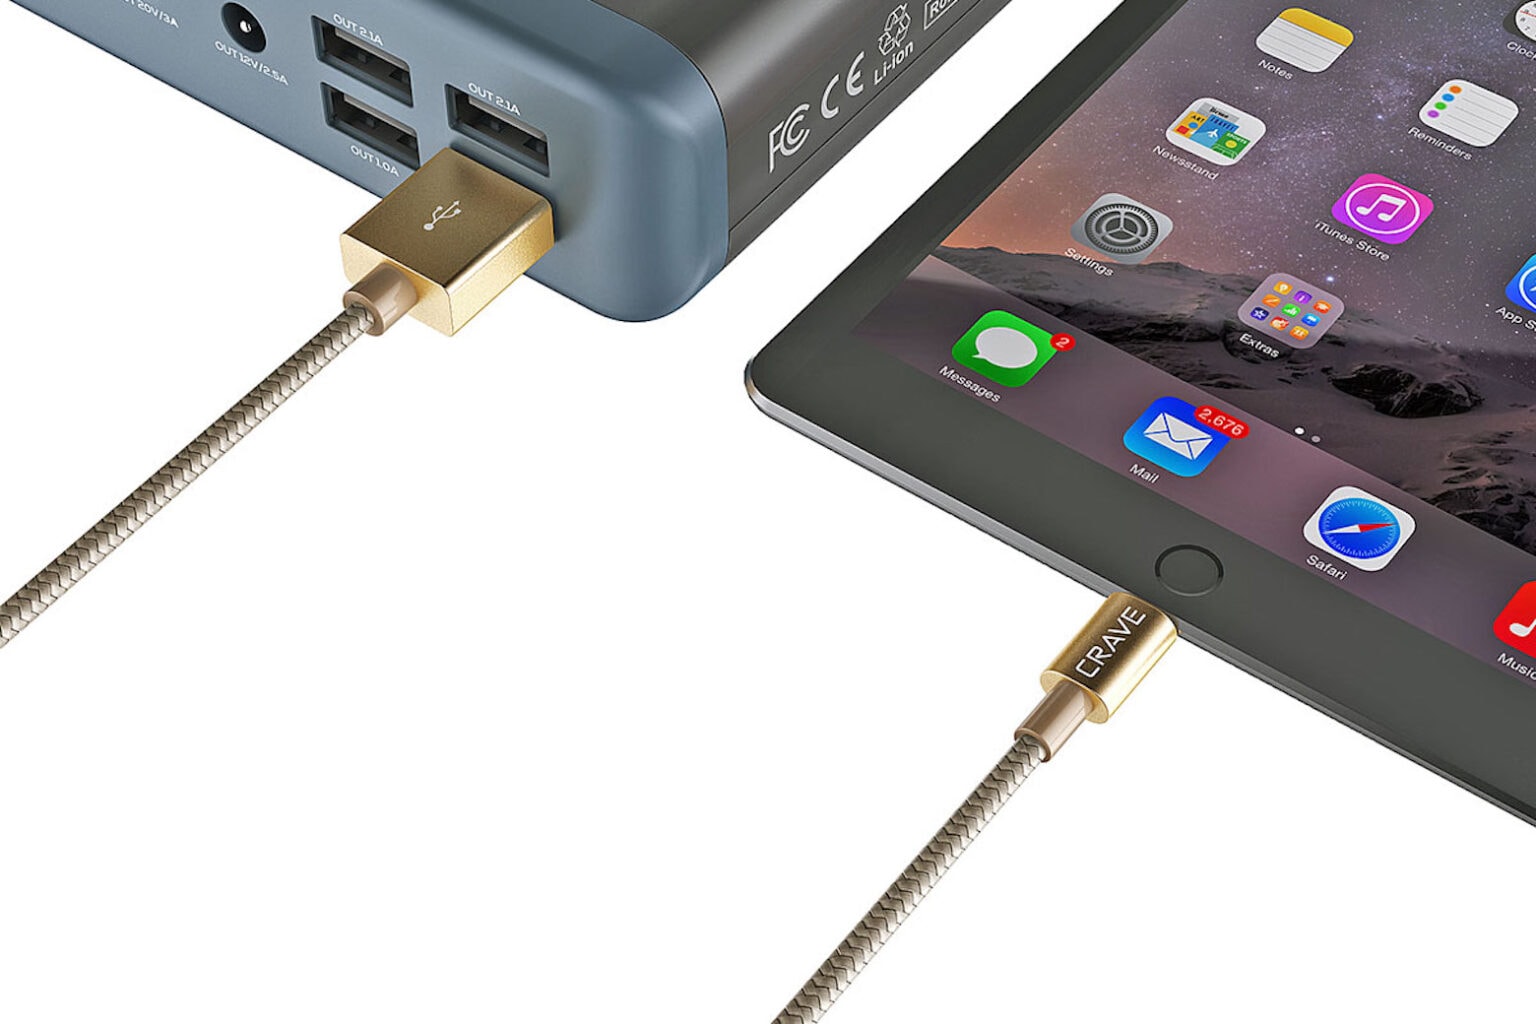 Grab a charger that'll last for only $15.